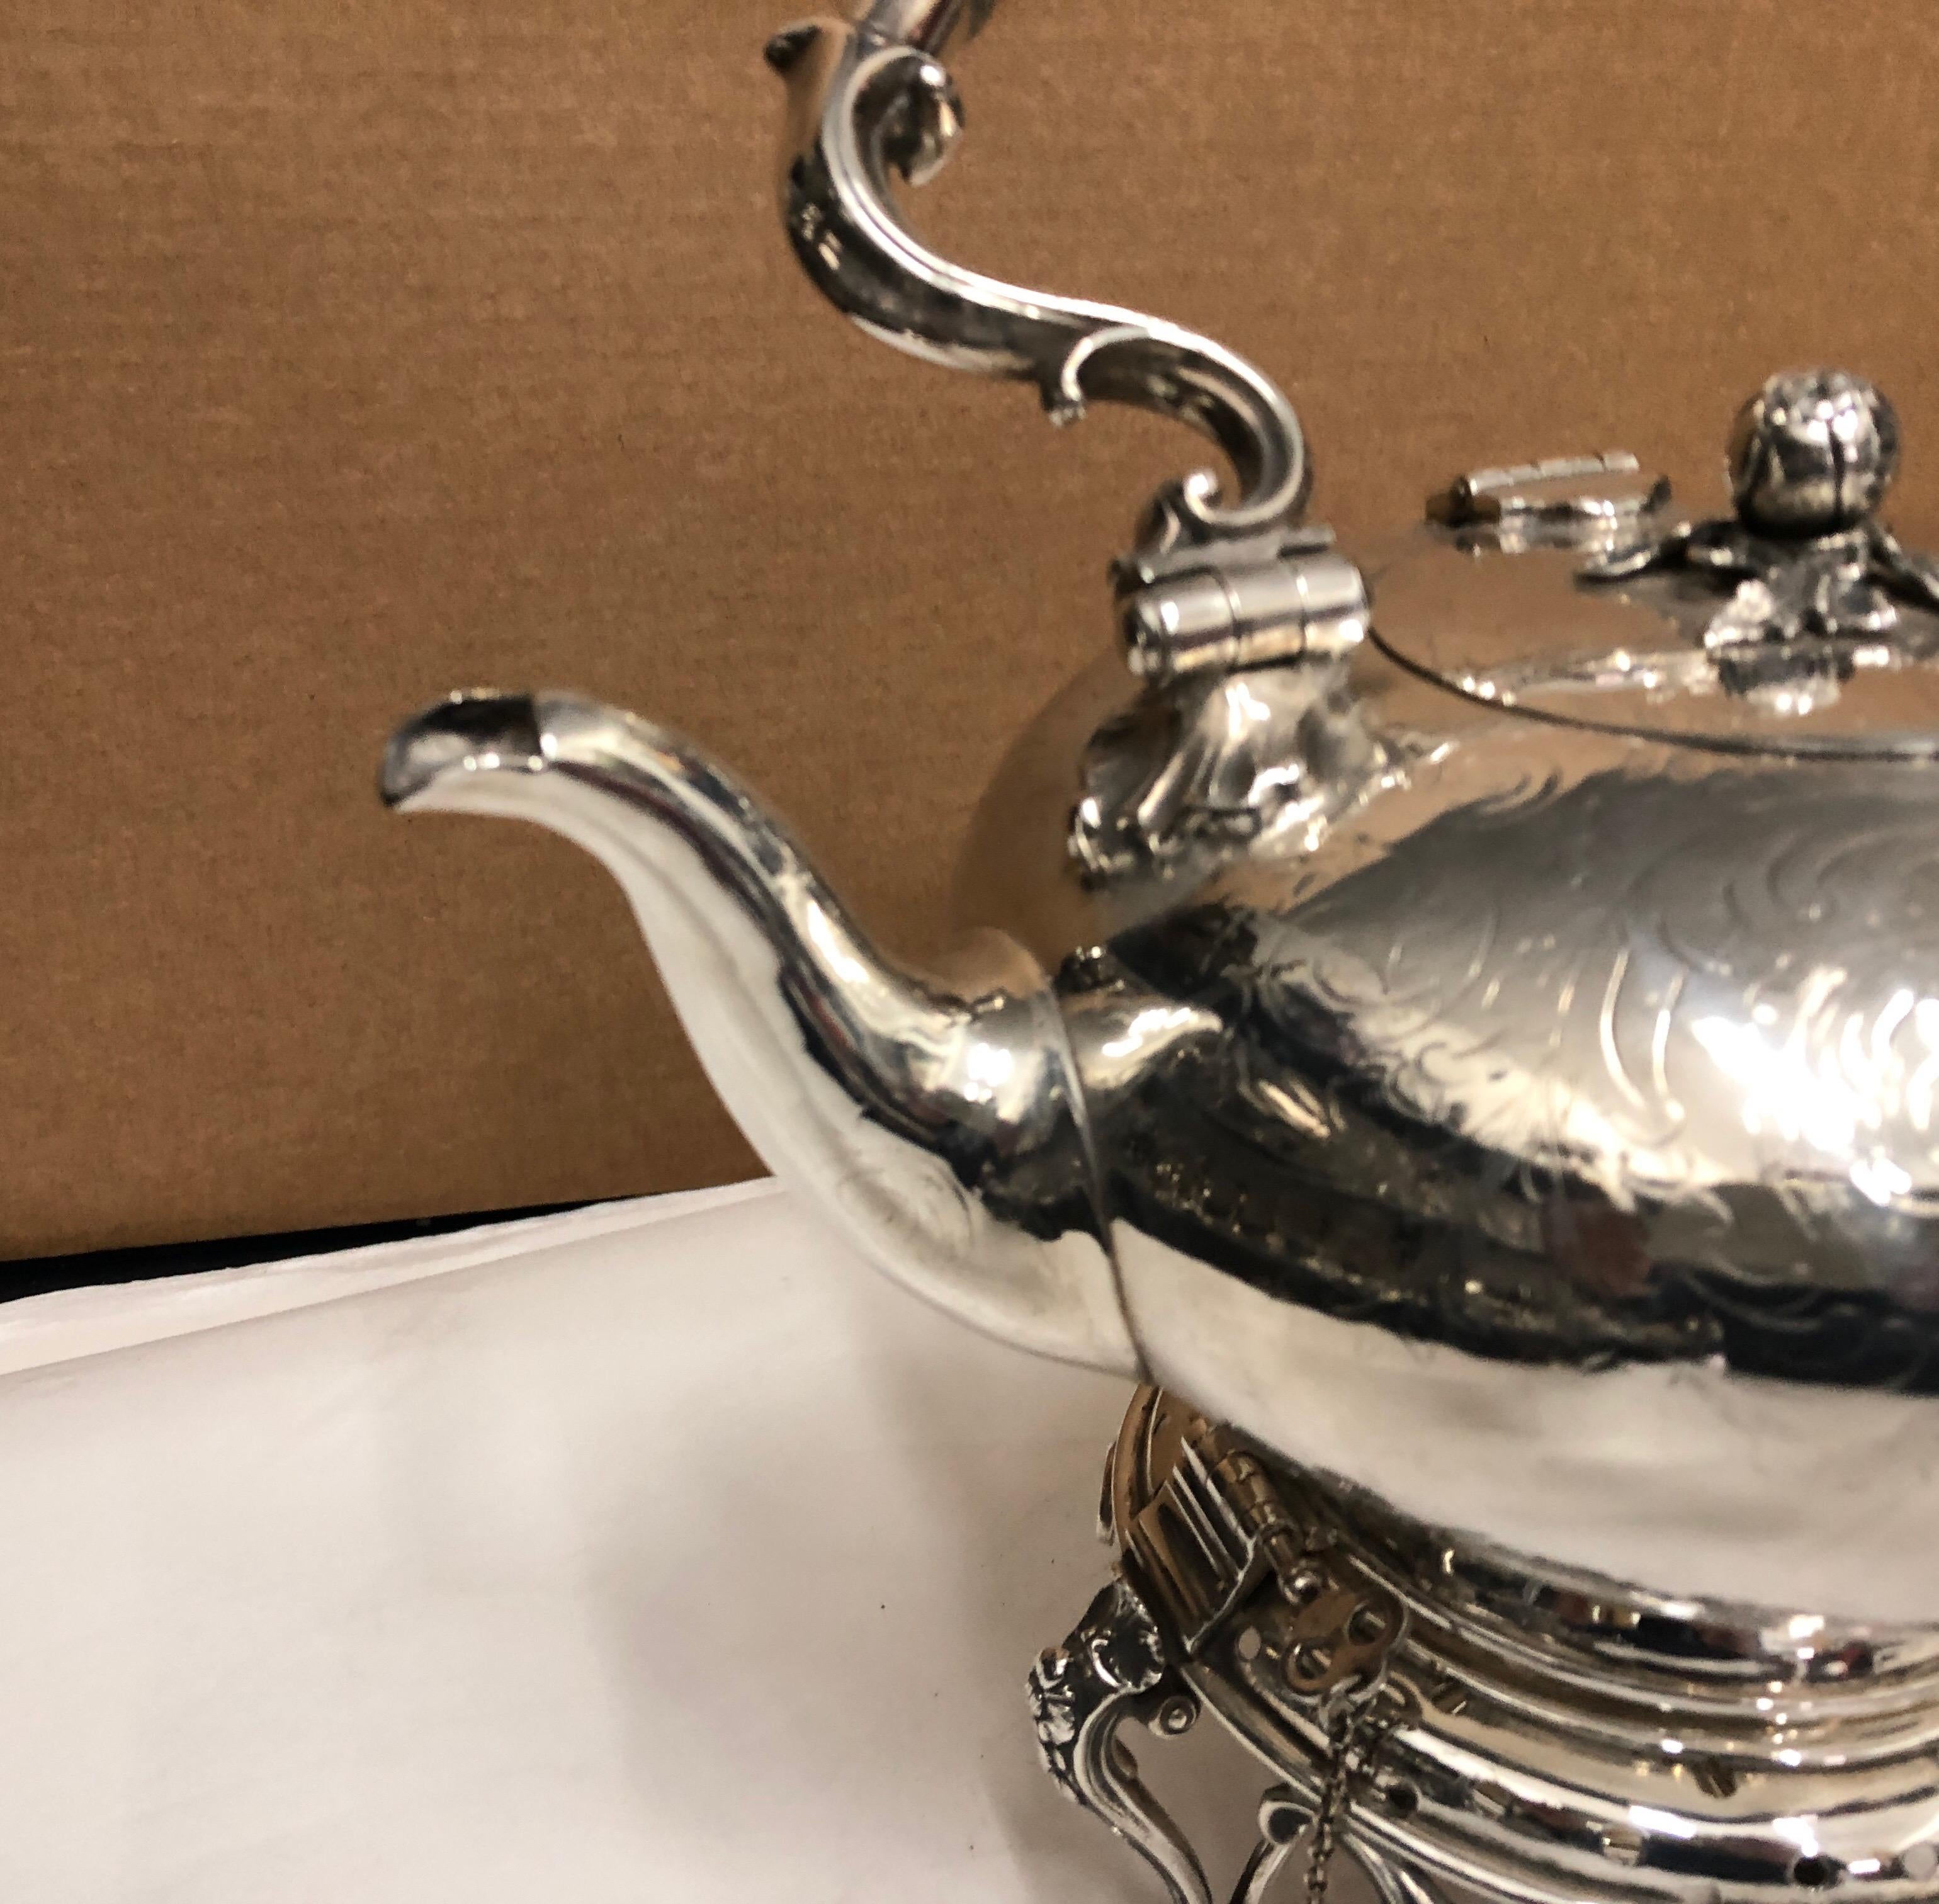 An engraved silver plated English kettle made in 1870, marked on the bottom, original conditions.